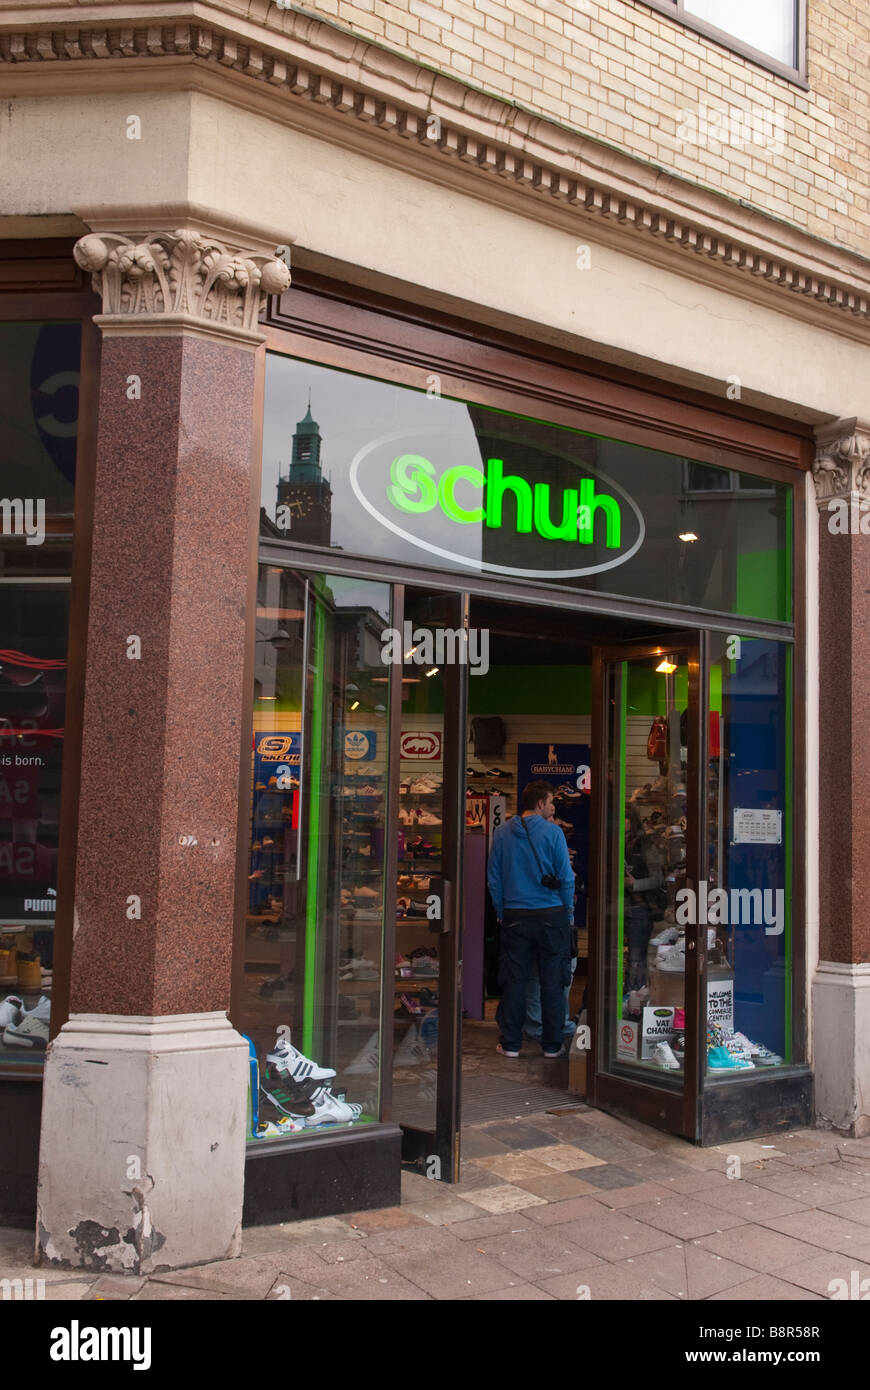 Schuh shoe shop store selling shoes and footwear in the city centre of Norwich,Norfolk,Uk Stock Photo